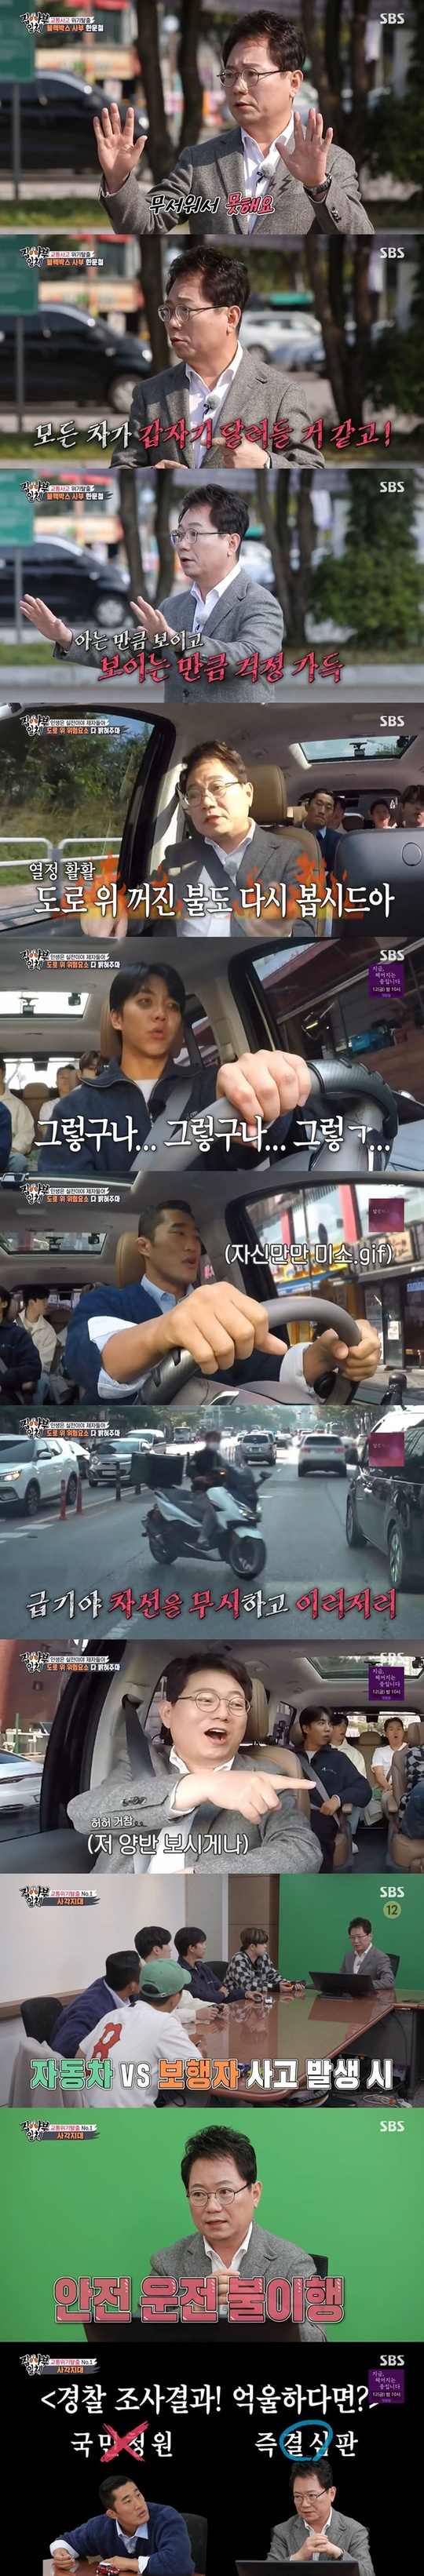 Han Moon-chul, who is a lawyer specializing in traffic accidents, said why he does not drive.On October 31, SBS All The Butlers appeared as a master of traffic accident specialist Han Moon-cheol to make safe Korea without traffic accidents.On the same day, a daily student with Master Han Mun-cheol appeared as rapper Grie, a son of Kim Gu-ra, a broadcaster. I like driving, but there were many accidents.My father sometimes asked me, Do you have a lot of accidents? Now I have a new family in my house and I think I should learn to drive well.In addition, Han Moon-cheol and Master Han Moon-cheol went on a full-scale road risk exploration. Master Han Moon-cheol said, I do not drive.I am afraid that all the cars will suddenly rush, the children will come in through the parked cars, and everything is a minefield. It is a occupational disease.The section that I can not see is slowly Gaya, but if I see it, I can not see it when I turn the corner, said Han Moon-cheol. Even if there is no traffic light, I slowly slow down and become Gaya.I can not get another car. Lee Seung-gi, who listened to it, said, I am so tired because I come into the alley.The next driver was Kim Dong-Hyun, who had 20 years of no-deal career; Kim Dong-Hyun expressed confidence that he had never had another car in his life.But despite Kim Dong-Hyuns safe driving, some motorcyclists suddenly hooked in or ignored lanes and were left in a dizzying situation.Han Mun-cheol, who saw this, said, Even if a motorcycle is injured, it can not complain.The disciples went to Master Han Mun-cheols office and played Toyota Game. It was time to think about the percentage of faults based on actual accident cases.The incident was followed by a three-person crossing that ran out into a dark night driveway, and the disciples claimed that the driver was 0 for negligence, saying, It is 10 to 0 unconditionally.However, Master Han Mun-cheol said: Police see Toyota as the perpetrator in the event of a pedestrian accident with Toyota; the police officer imposed a penalty on the borrower.I am not sure whether it is unfair or not. I decided to insure the treatment cost.